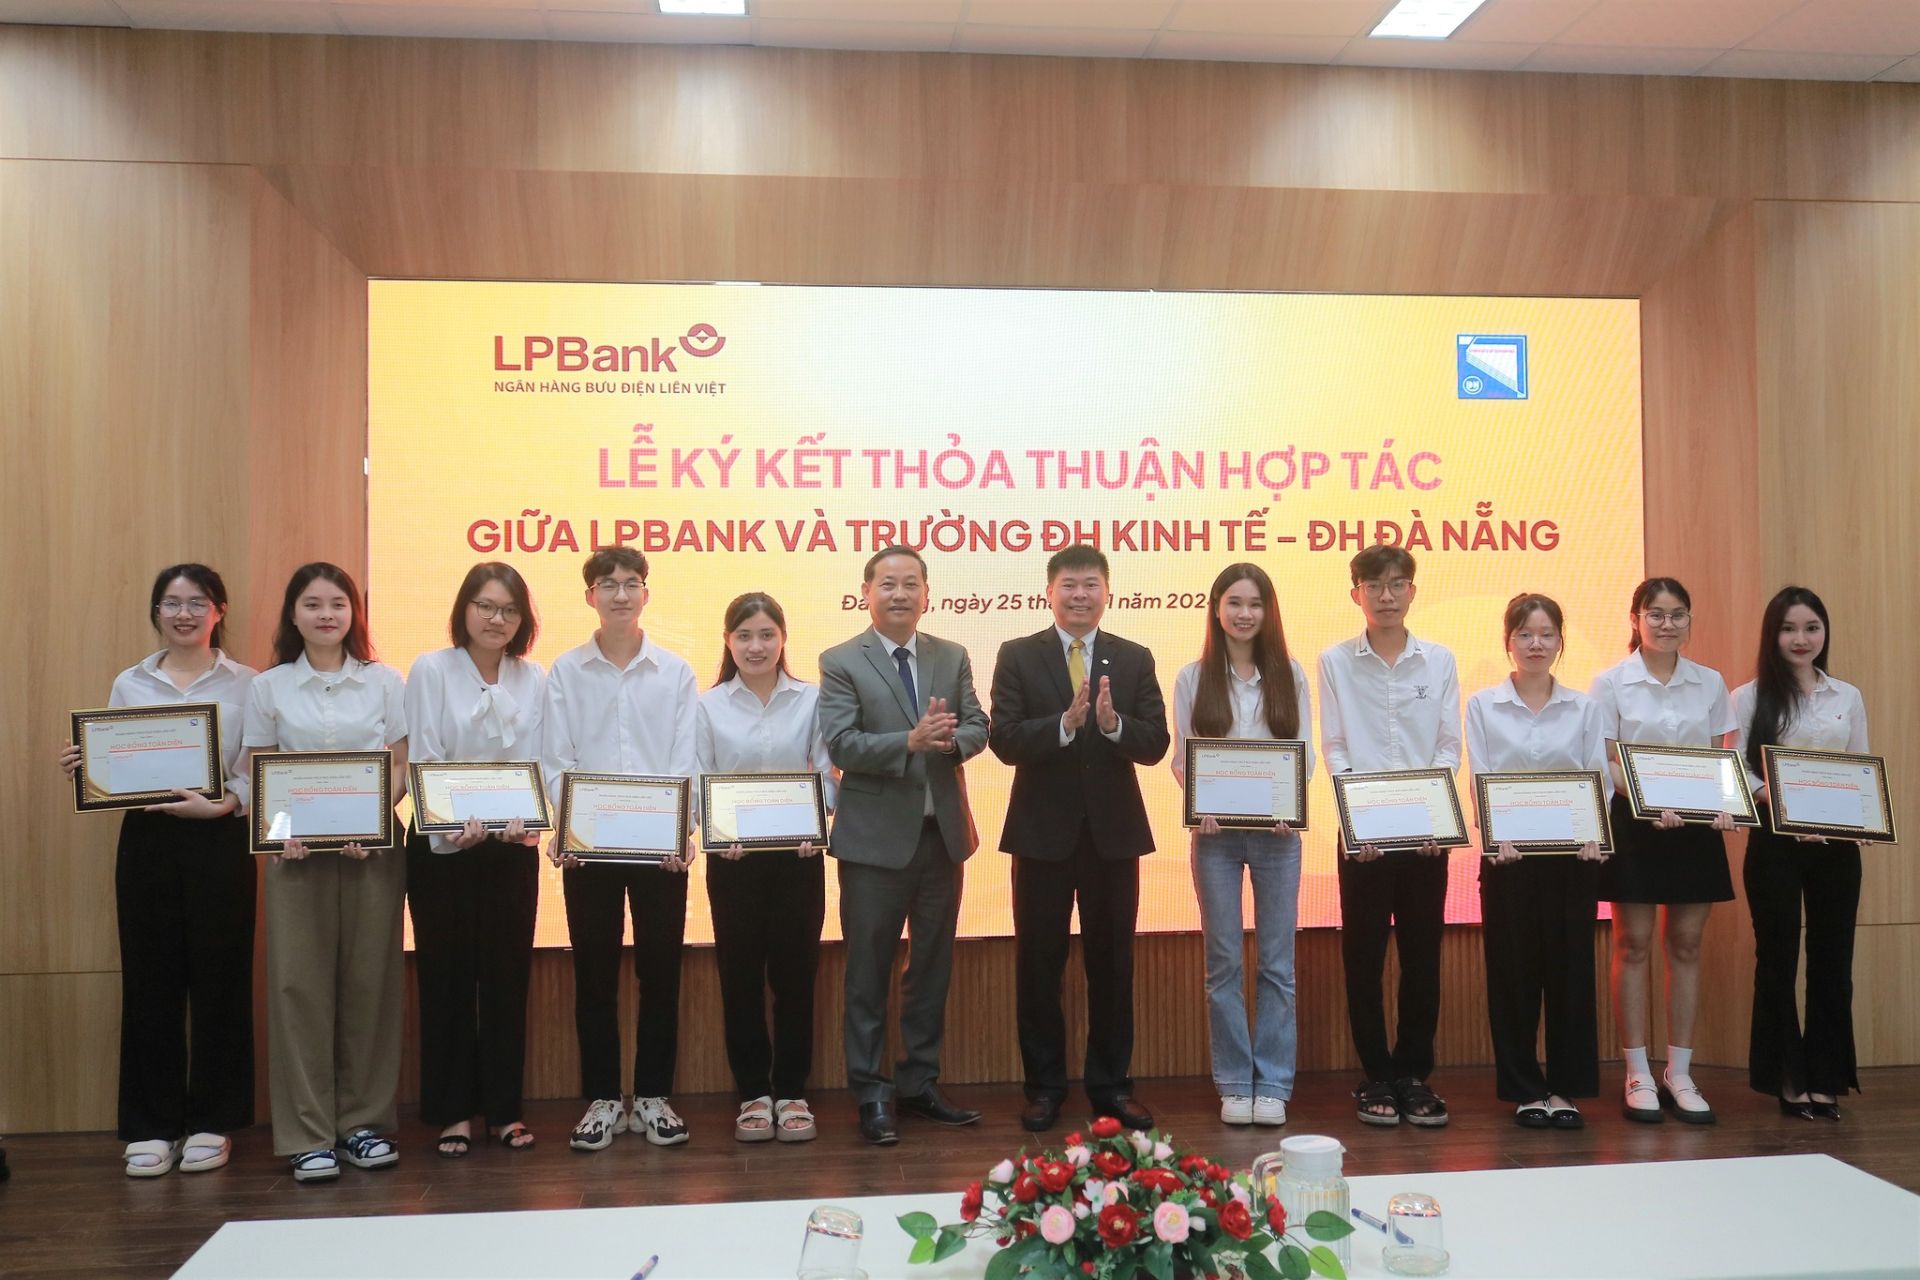 LPBank has awarded 10 scholarships with a total value of VND 50 million to students with excellent academic achievements and overcoming difficulties